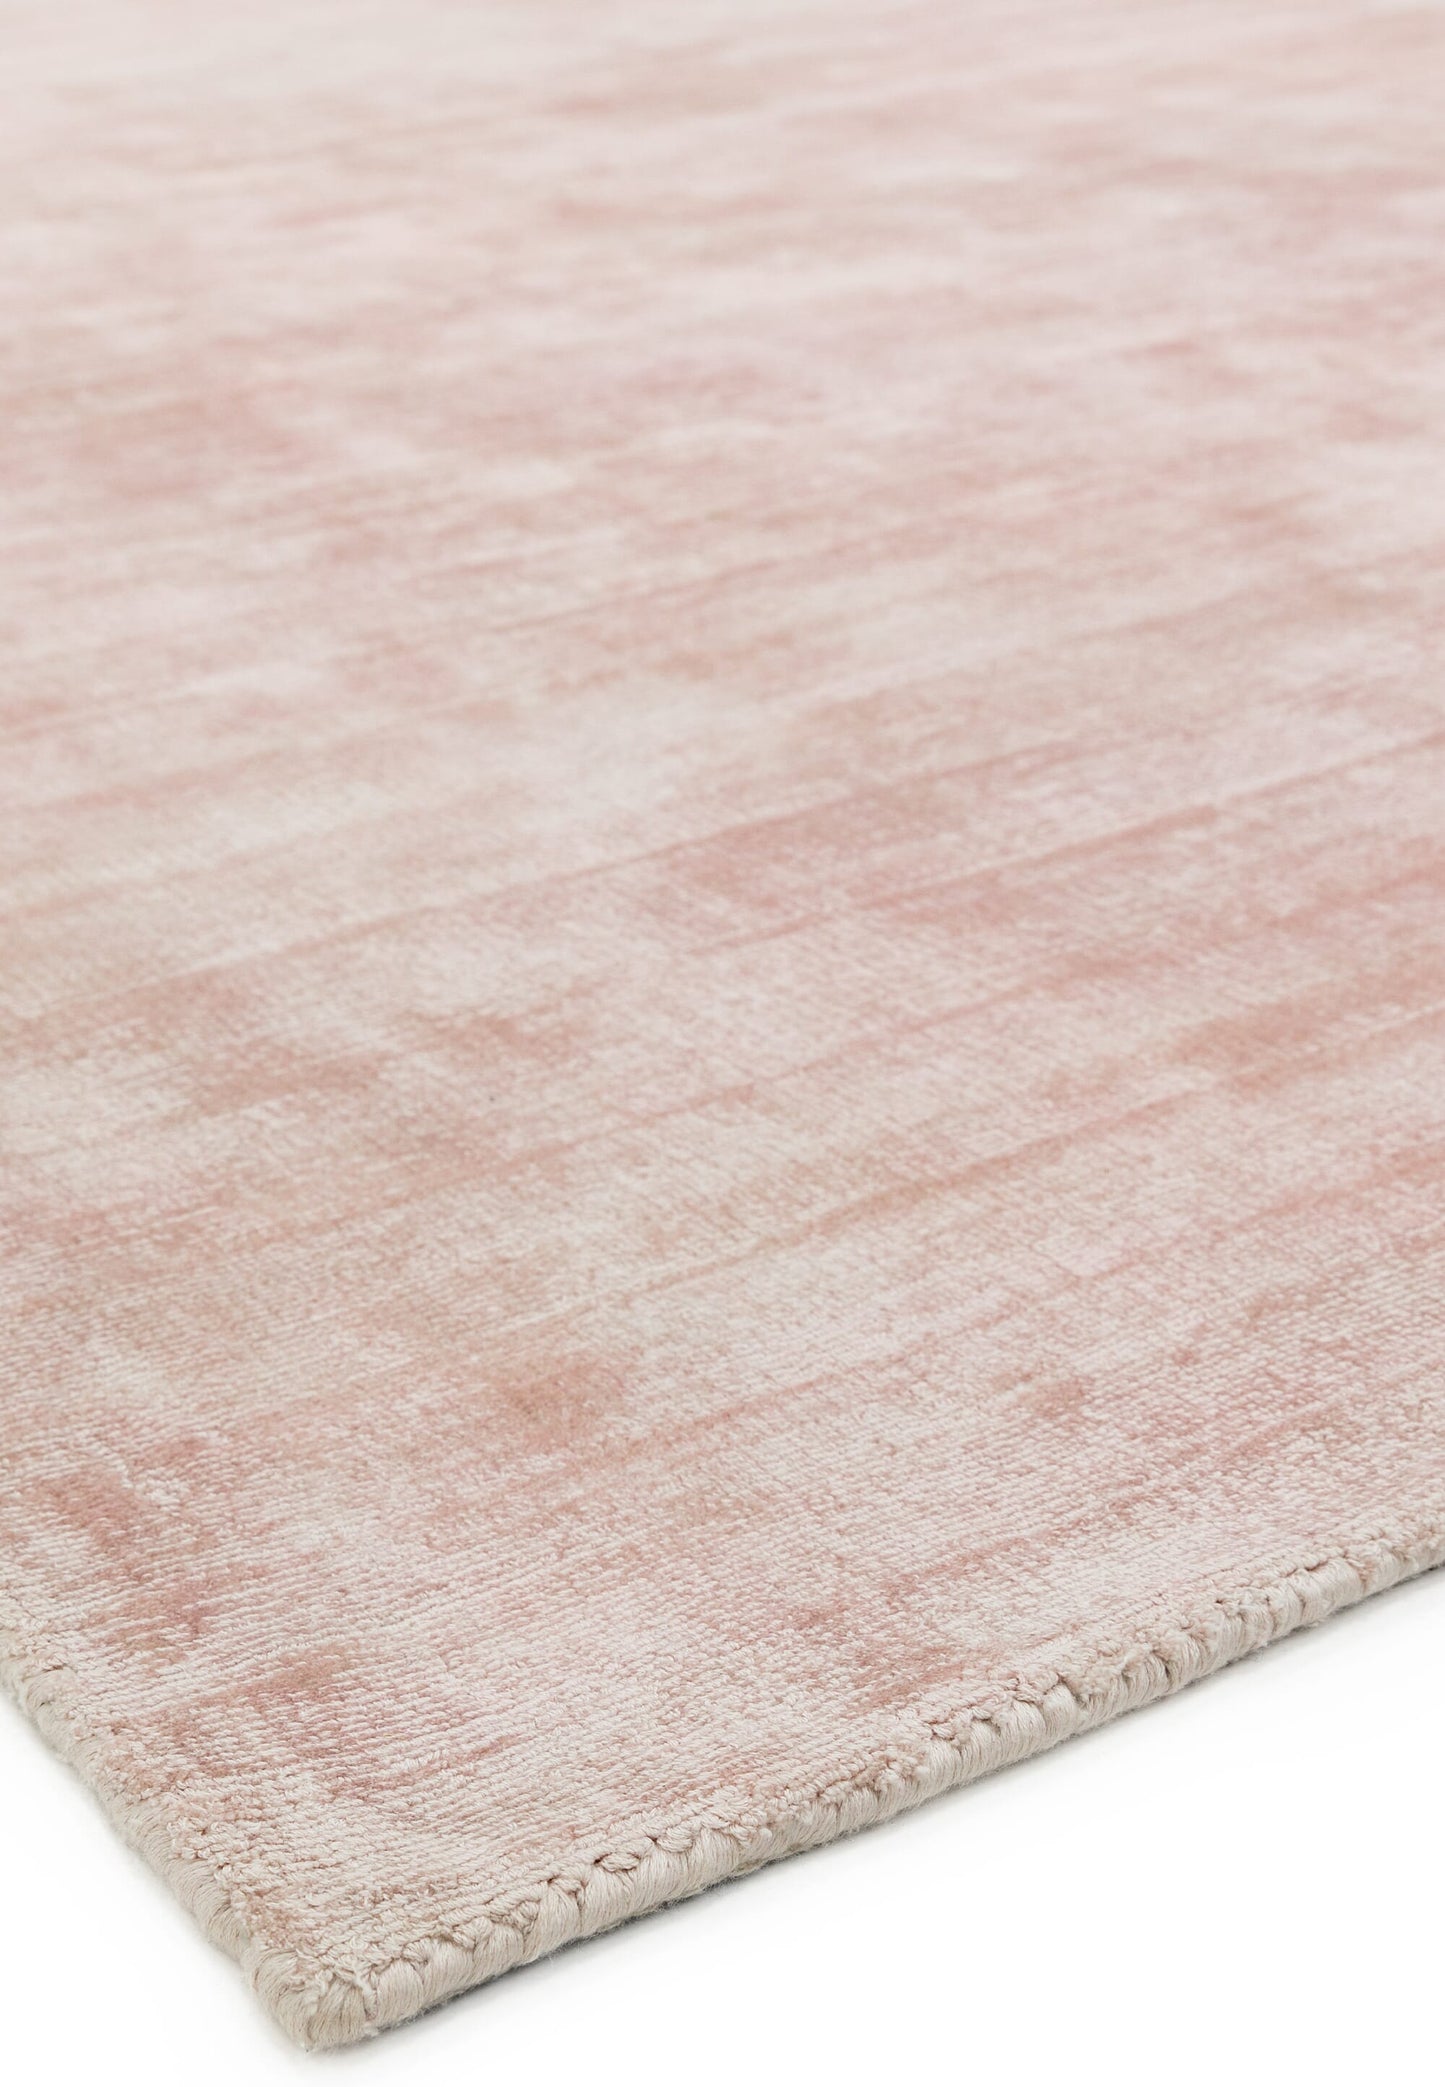 Asiatic Carpets Blade Hand Woven Rug Pink - 160 x 230cm